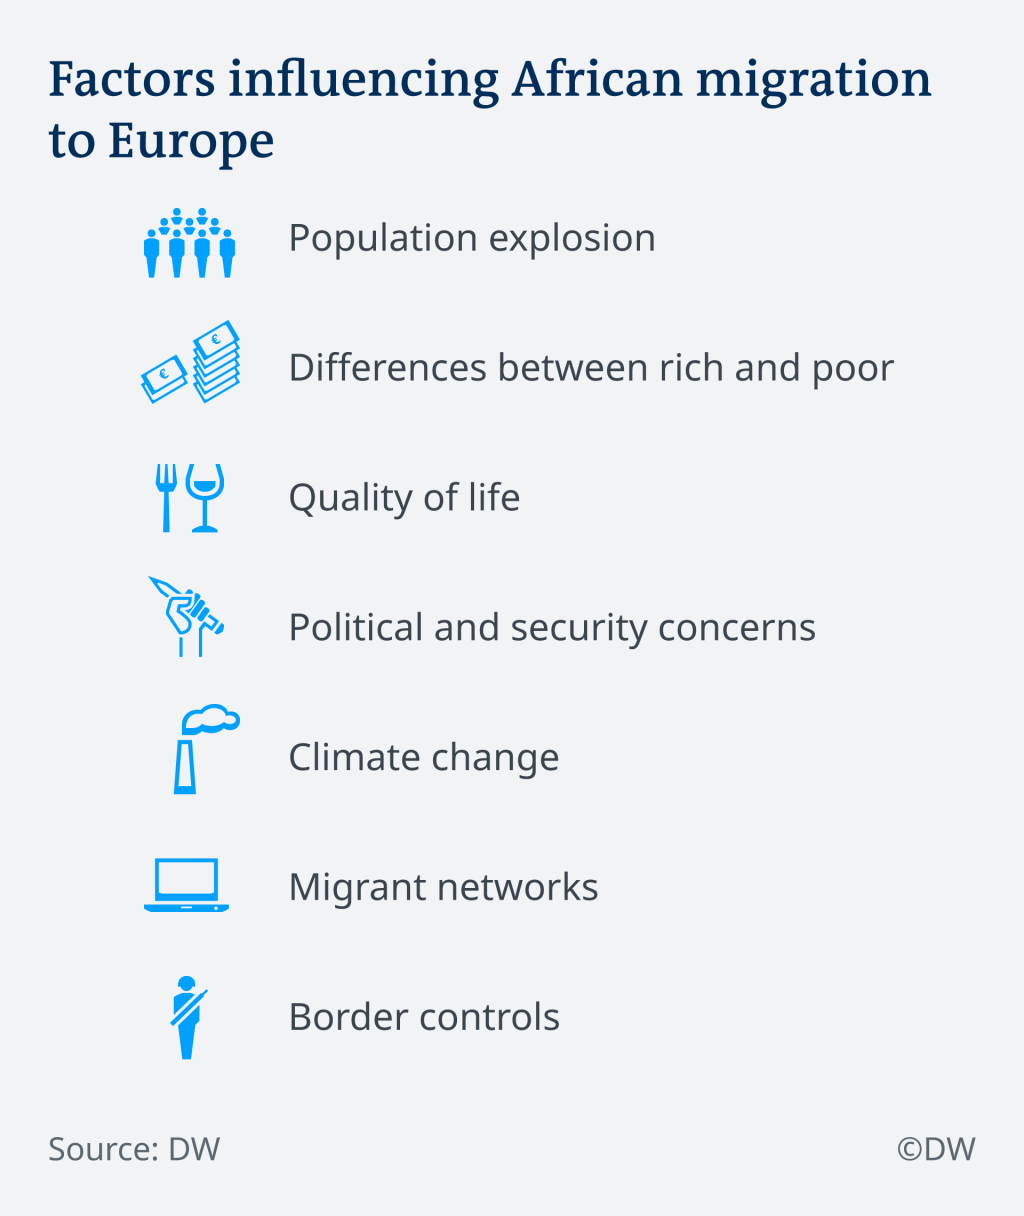 Factors influencing African migration to Europe | Credit: DW